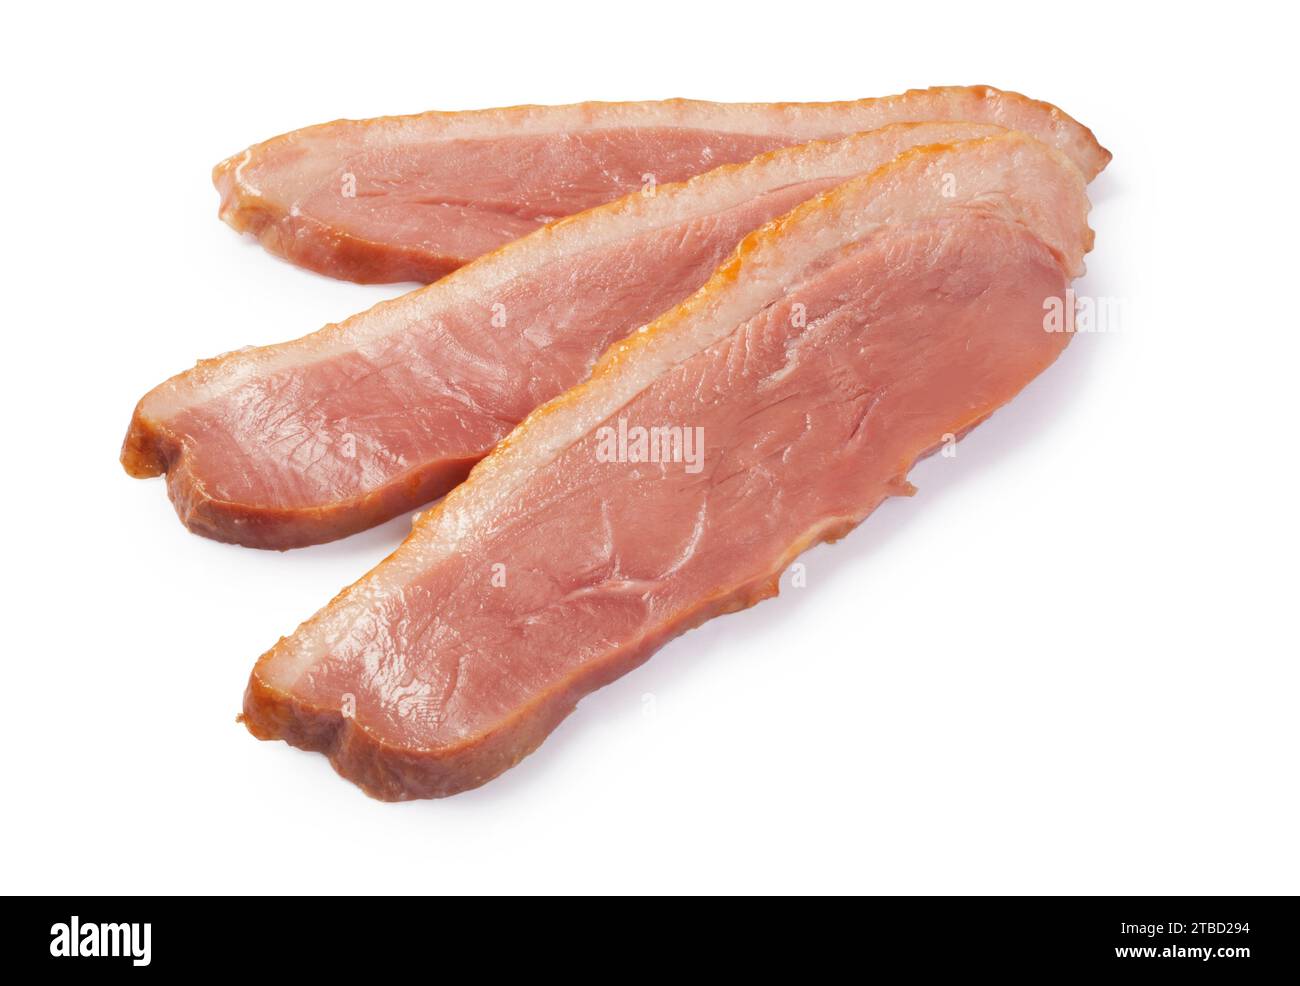 Studio shot of sliced smoked duck breast cut out against a white background Stock Photo